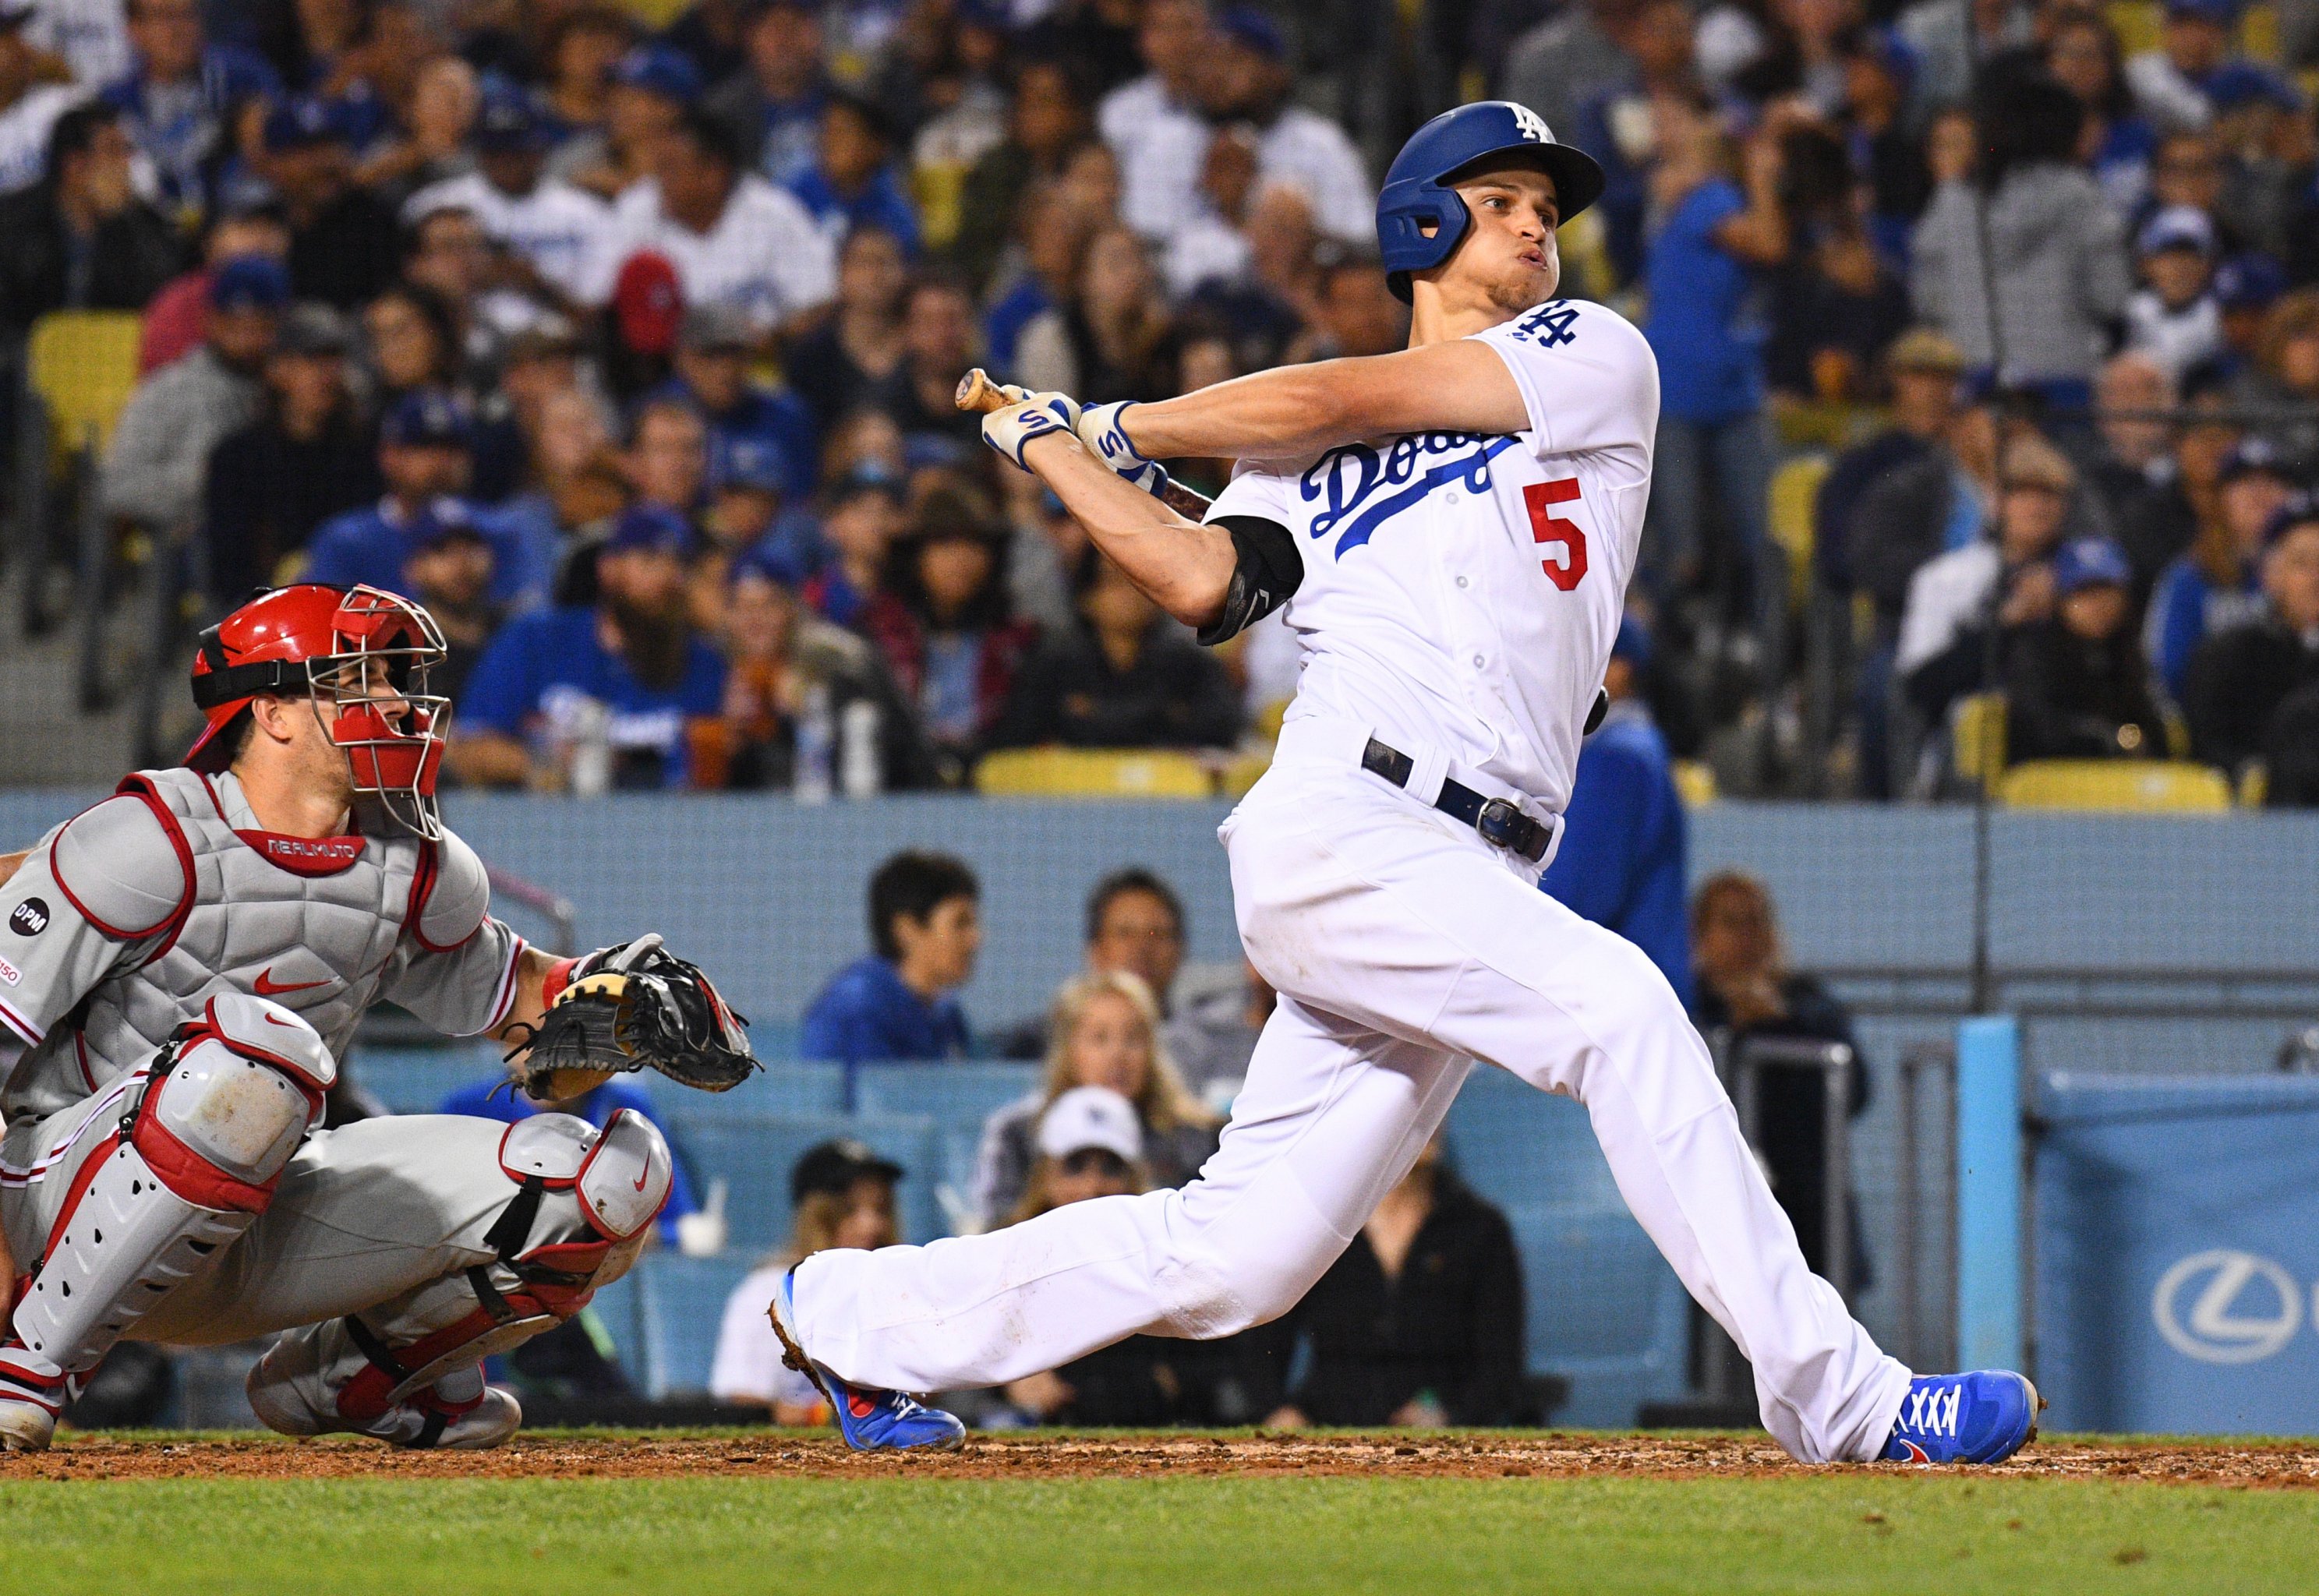 Dodgers' Corey Seager tries to take success in stride